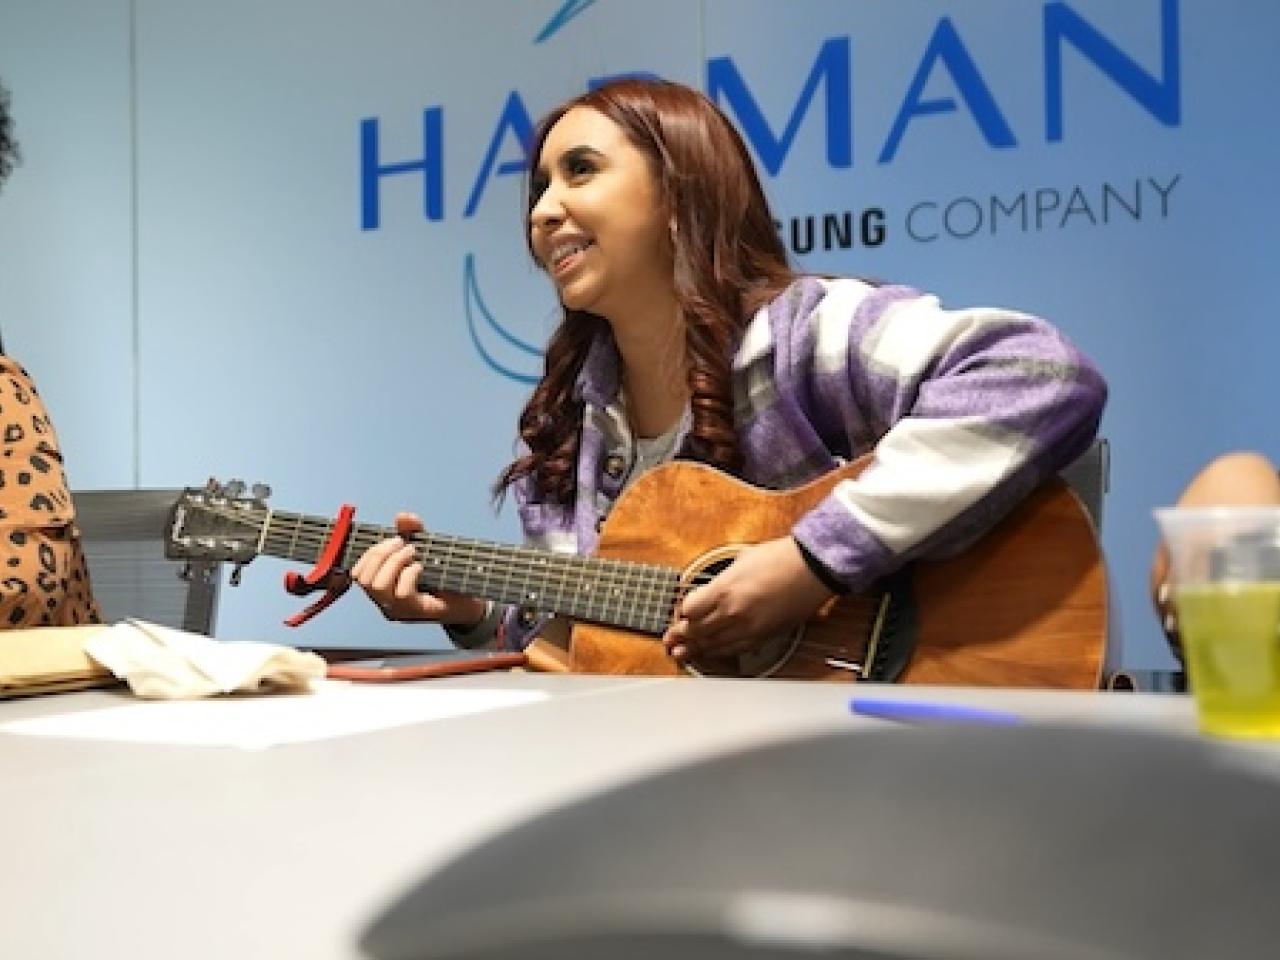 HARMAN Will: Young girl playing an acoustic guitar.